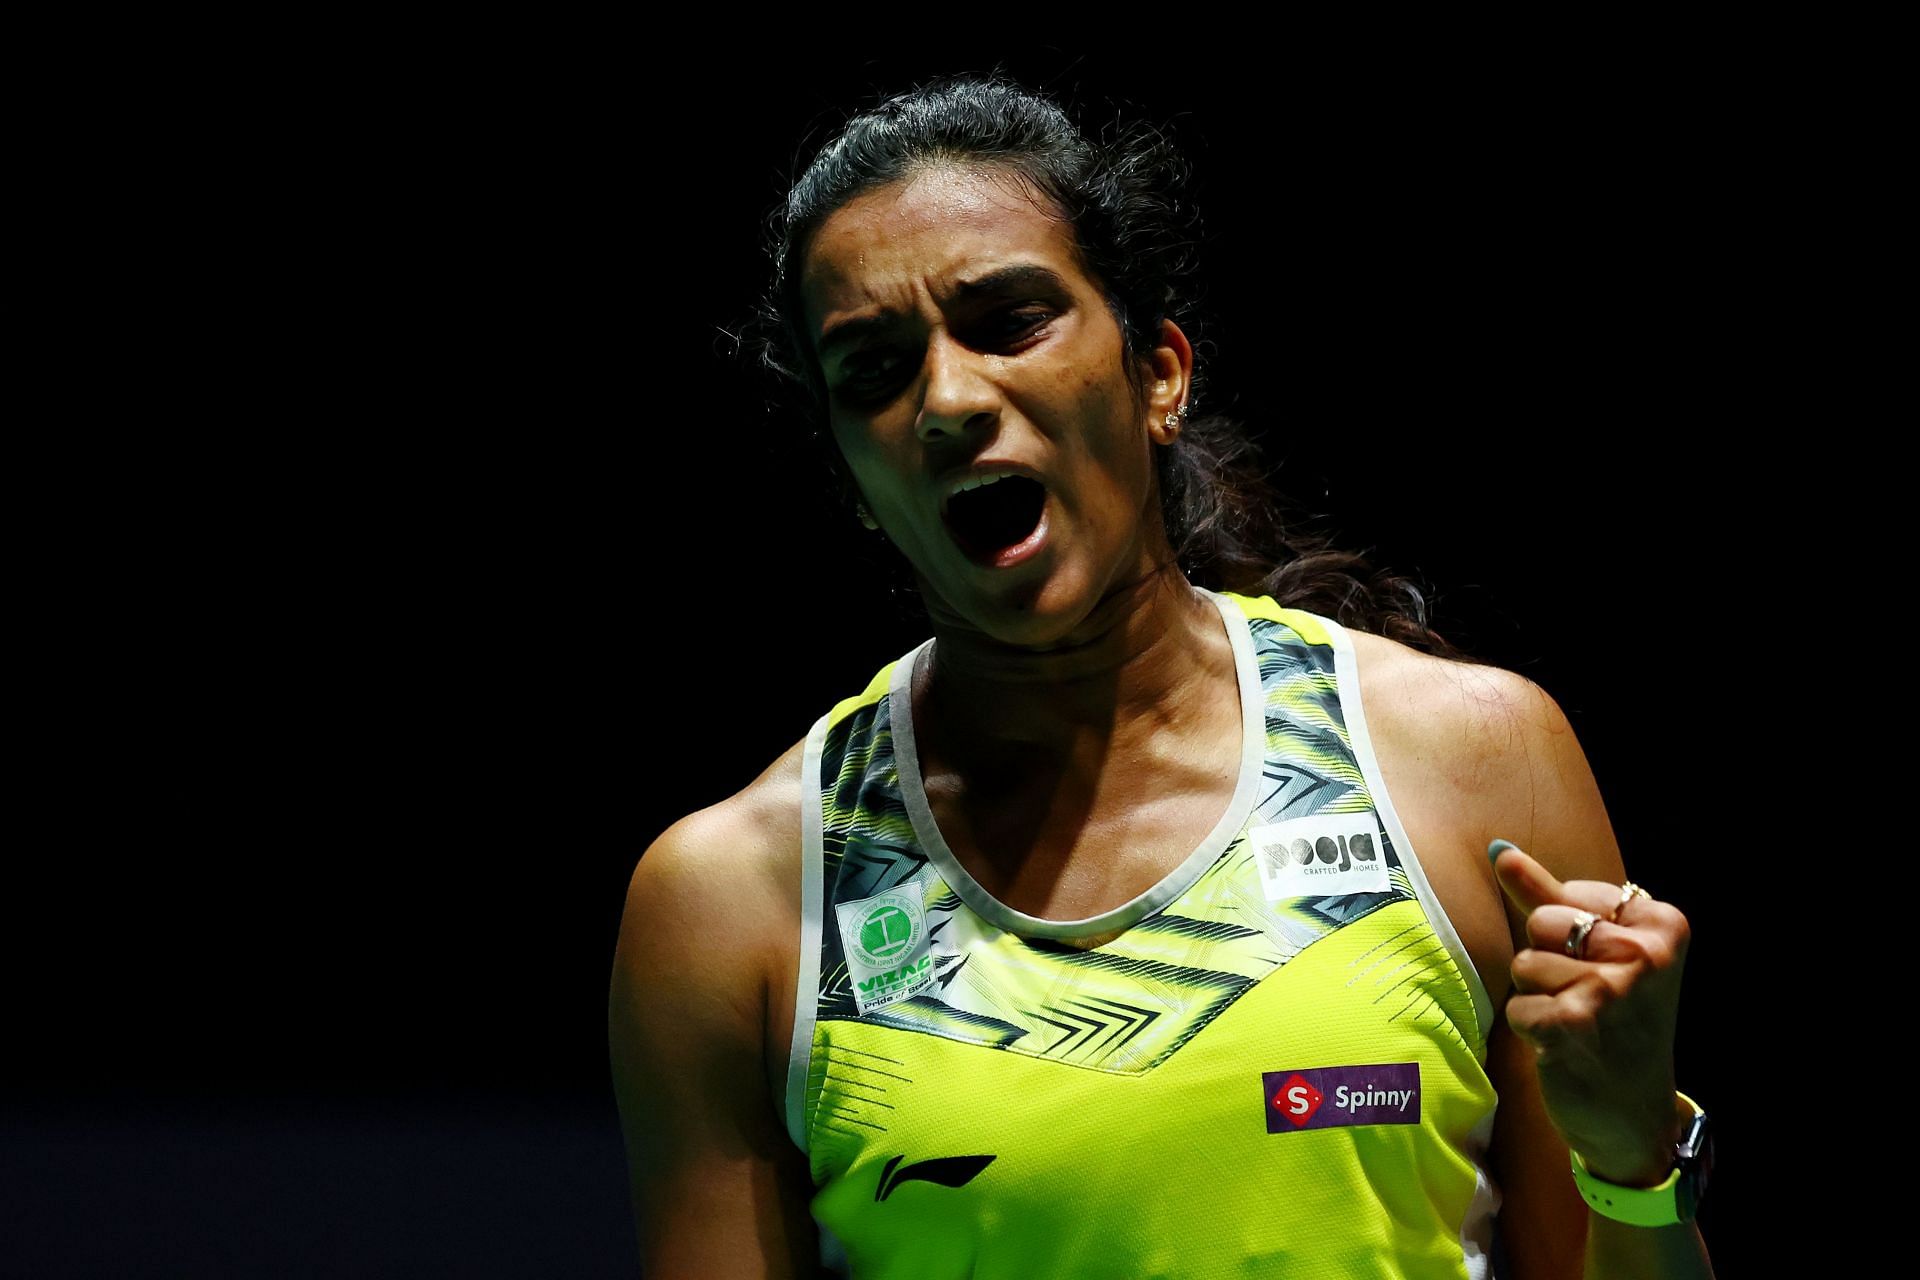 Singapore Open champion PV Sindhu will lead the Indian badminton team on Day 2 of the 2022 Commonwealth Games (Image credits: Getty Images)